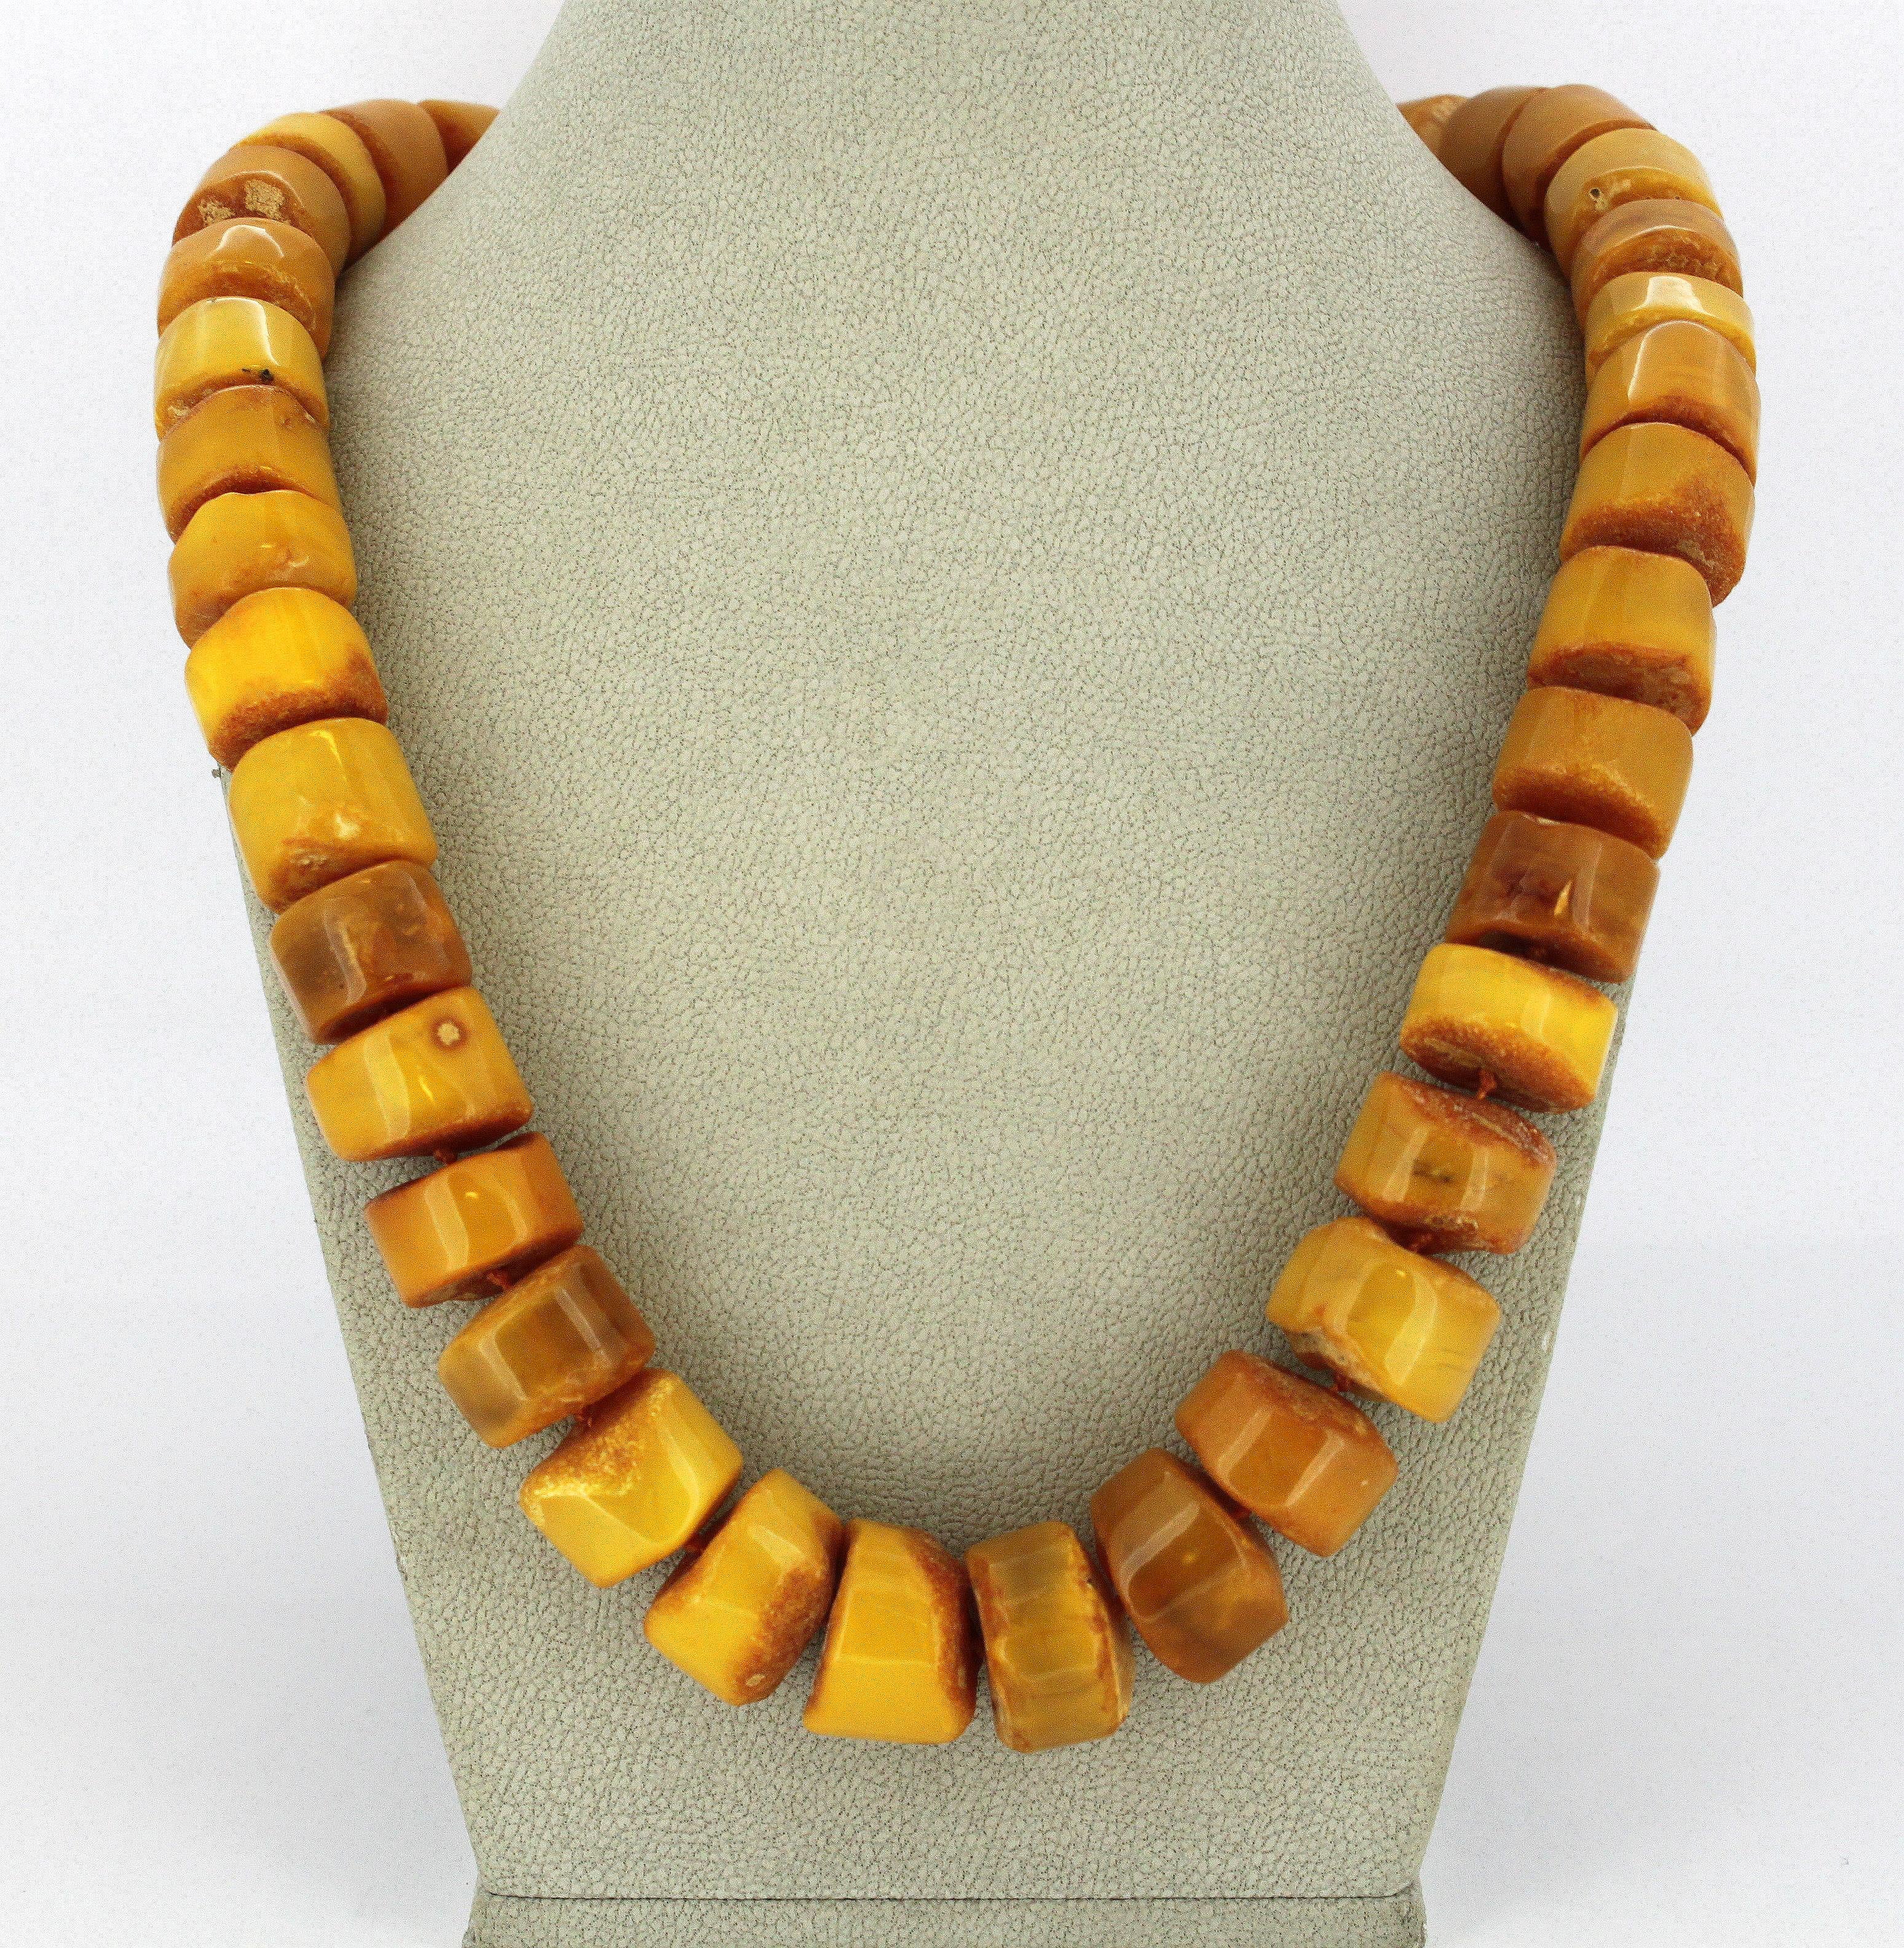 Natural Baltic amber necklace in the form of half polished tablets, with sterling silver clasp.
Hallmarked 925.
Circa 1950's

Dimensions -
Length : 52 cm
Width : 1.9 cm
Weight : 80 grams

Amber - 
Treatment : Natural

Condition: Pre-owned, general